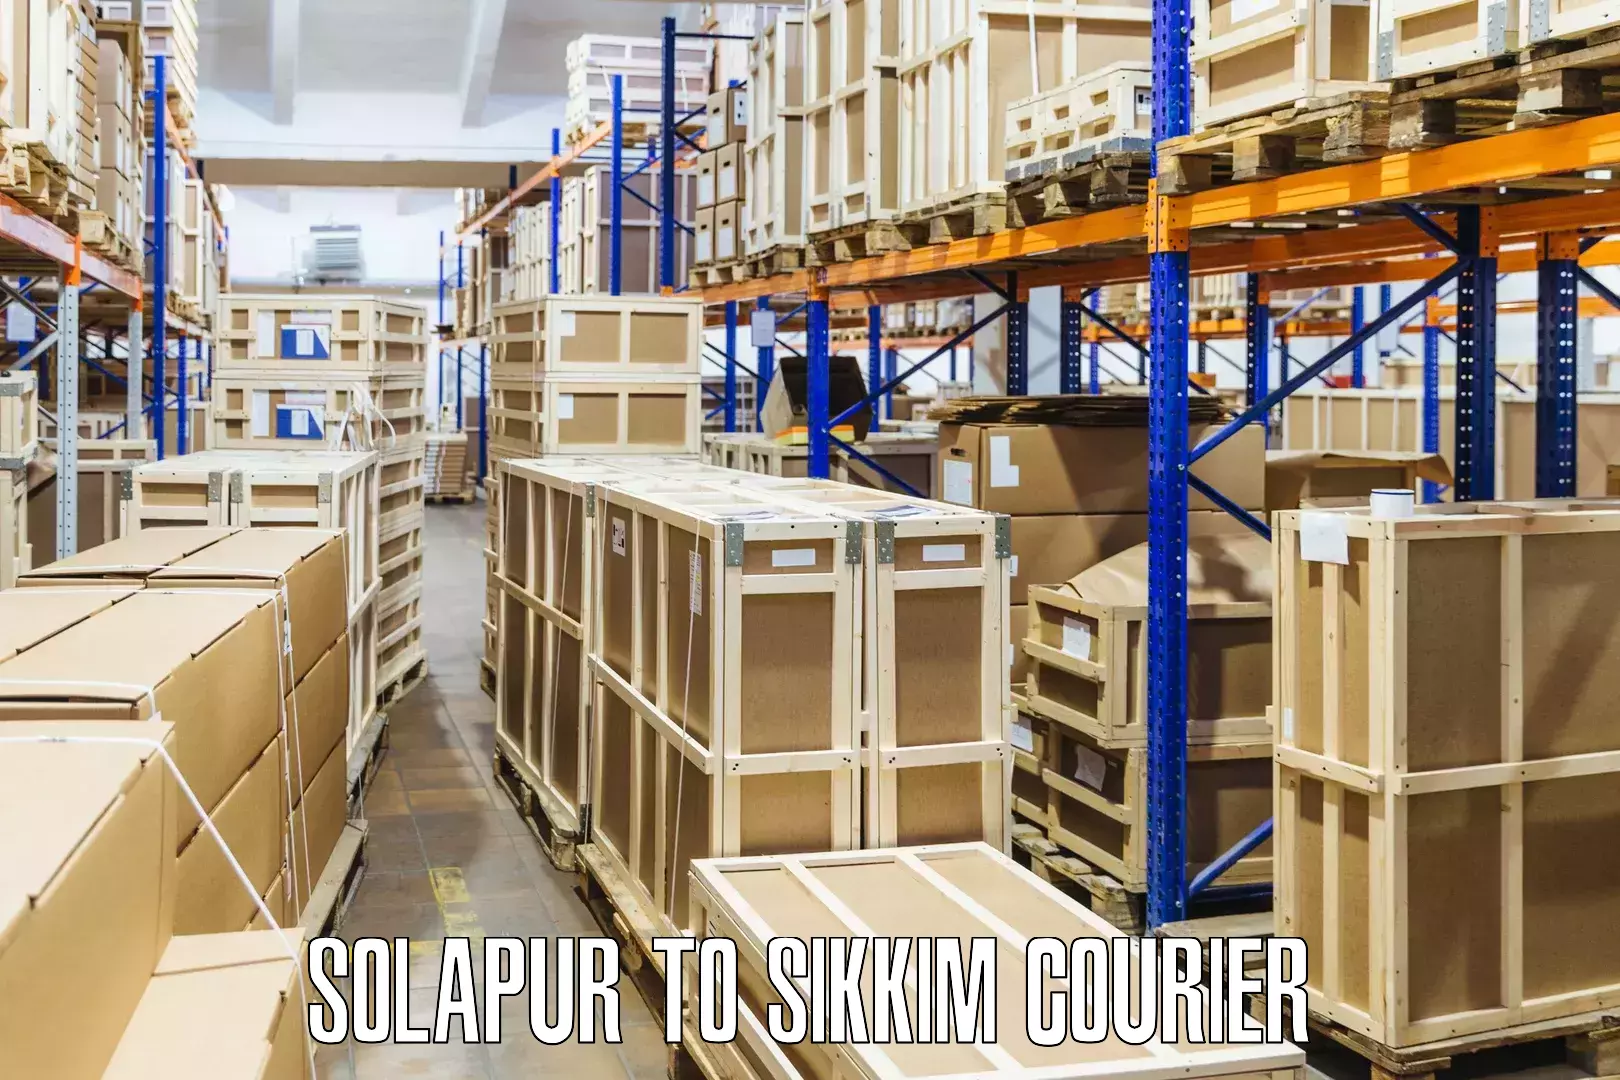 Courier service partnerships Solapur to Sikkim